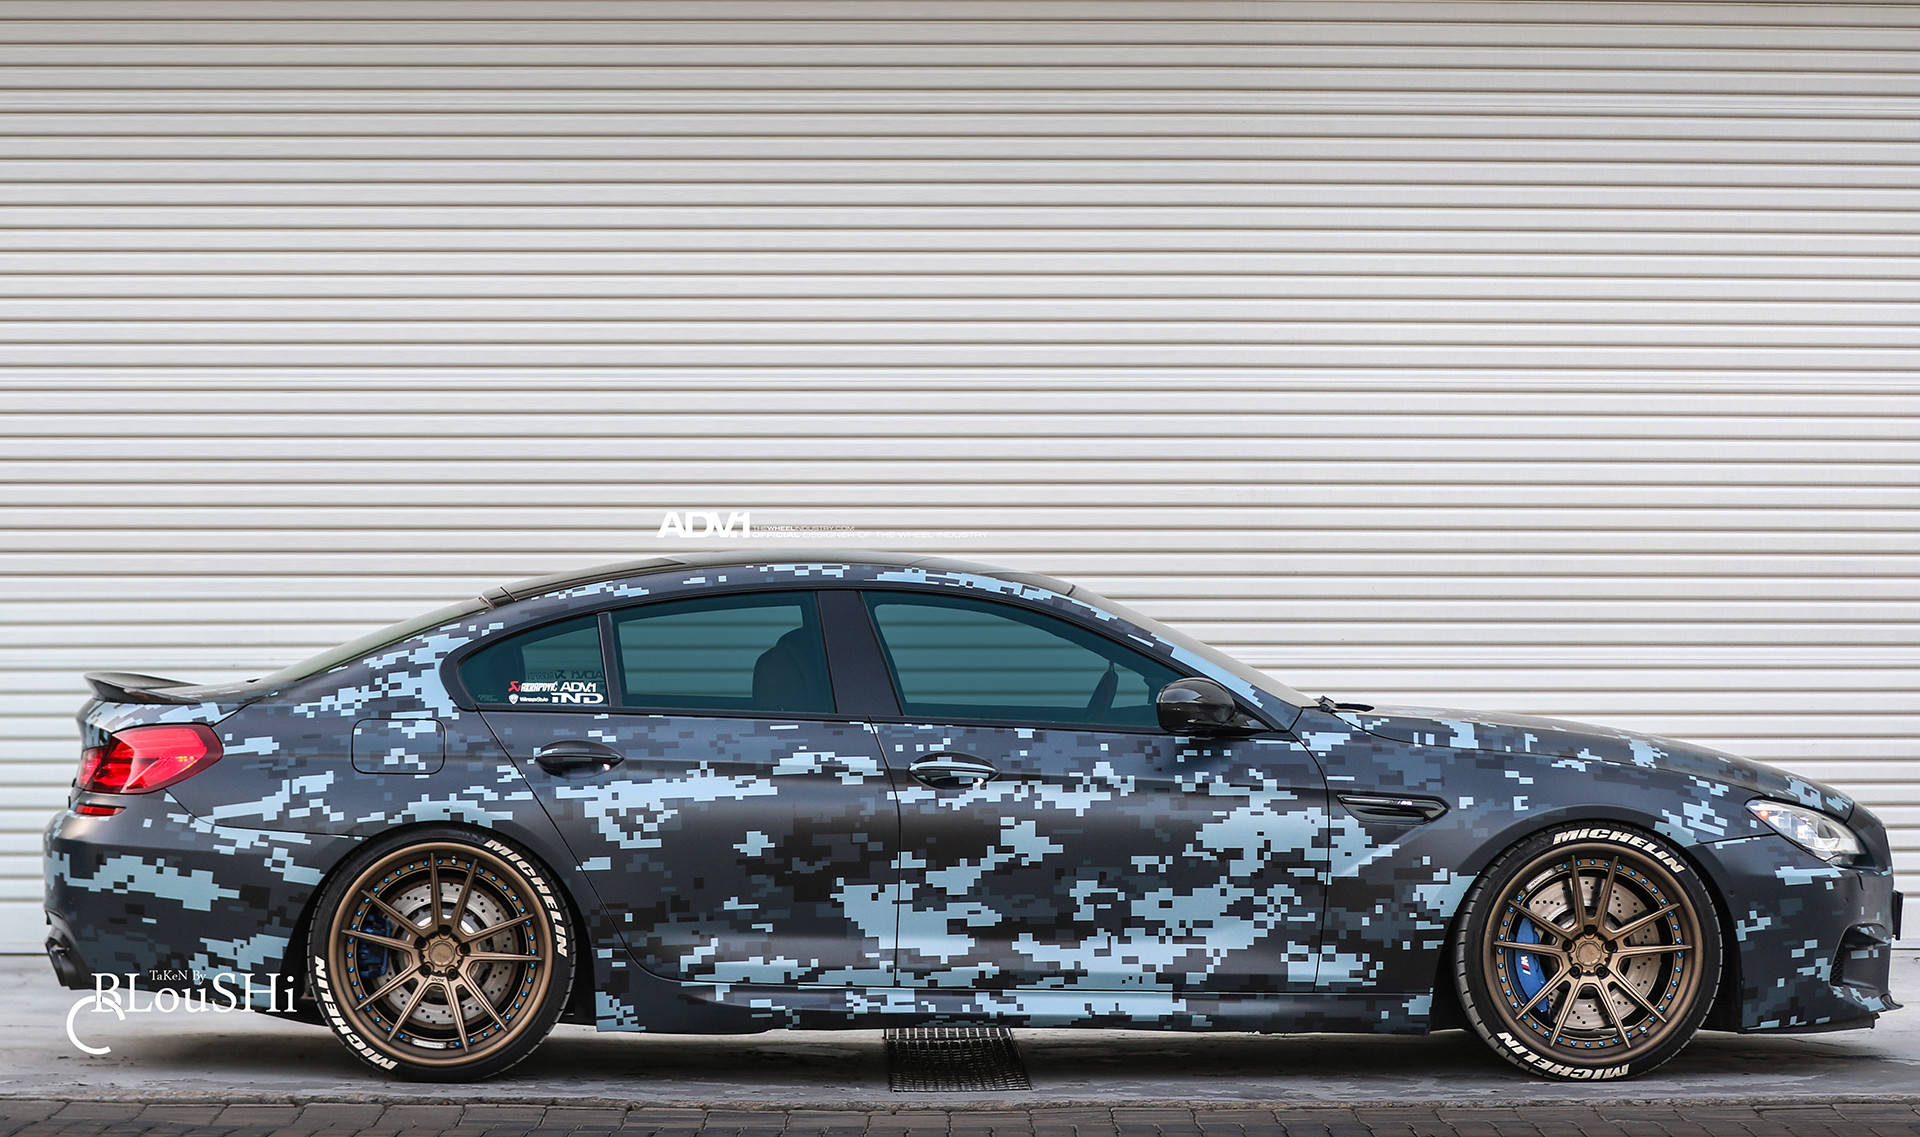 Stealthy Sophistication in the Black Camouflaged BMW M5 Wallpaper